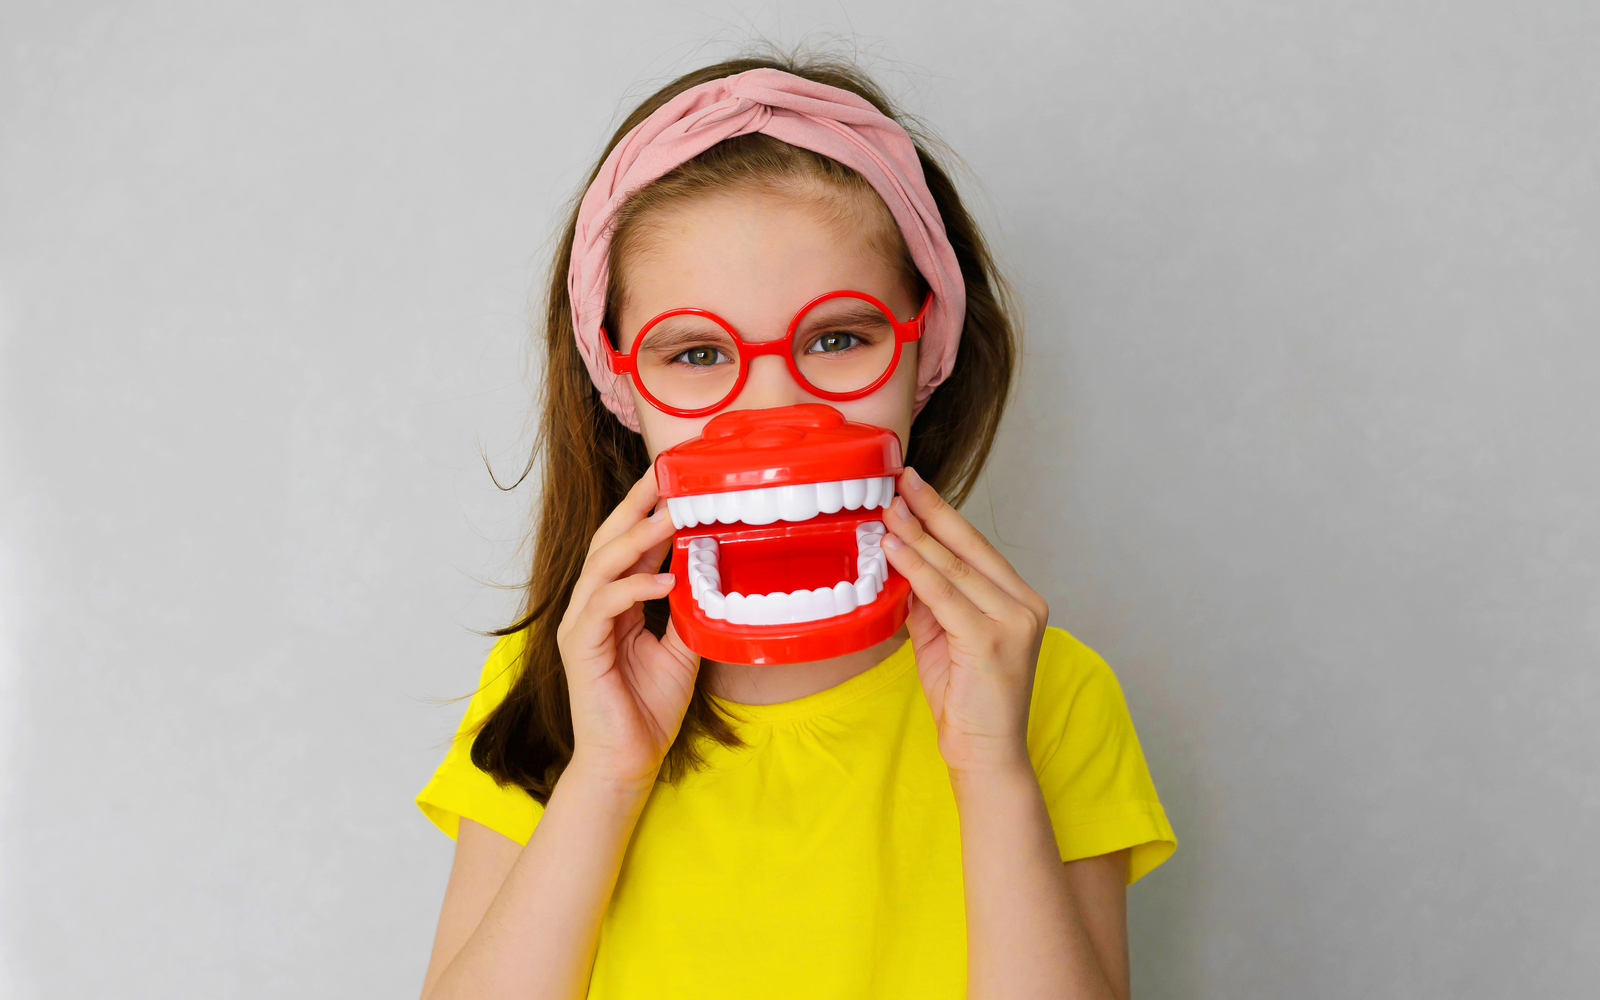 Smiling playful child with false teeth